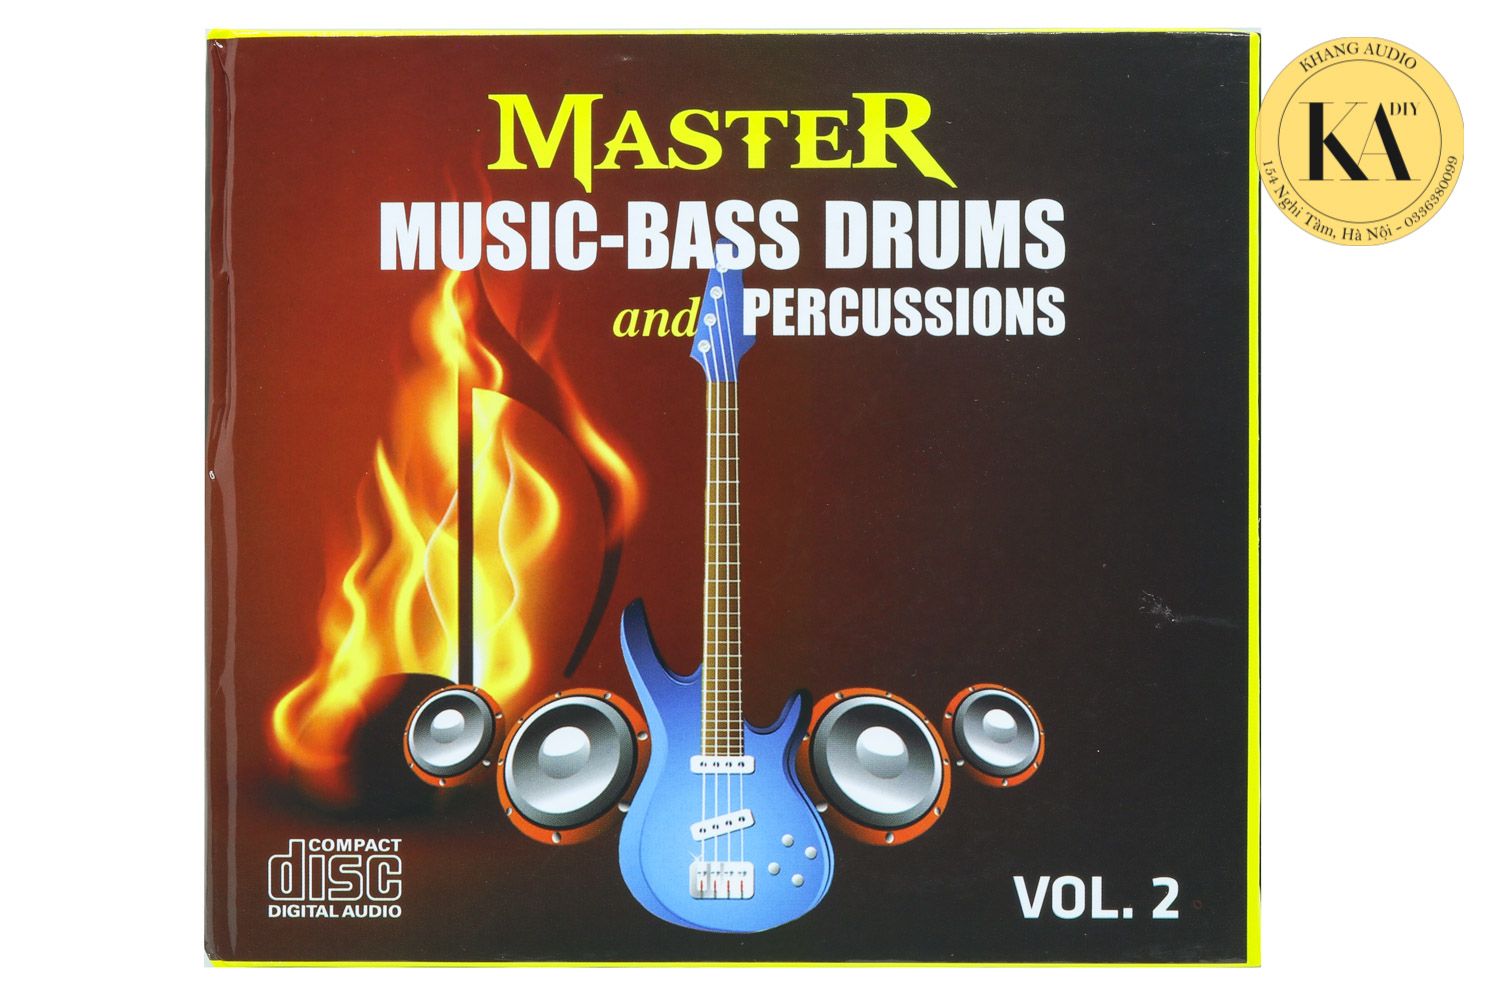 Master Music - Bass Drums and Percussions Vol.2 Khang Audio 0336380099